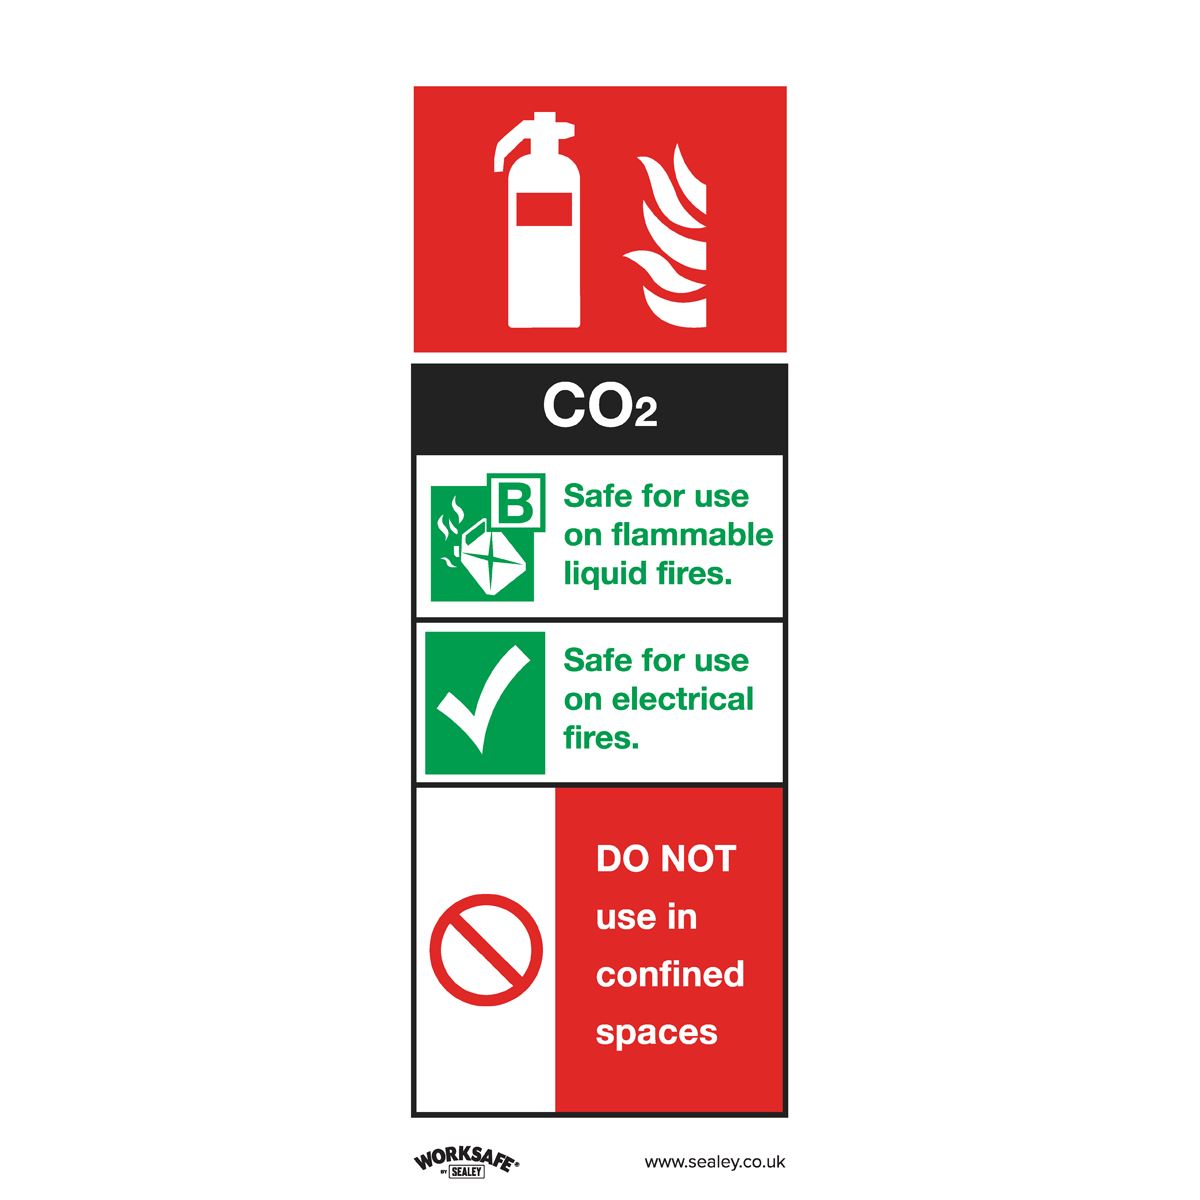 Worksafe by Sealey Safe Conditions Safety Sign - CO2 Fire Extinguisher - Rigid Plastic - Pack of 10